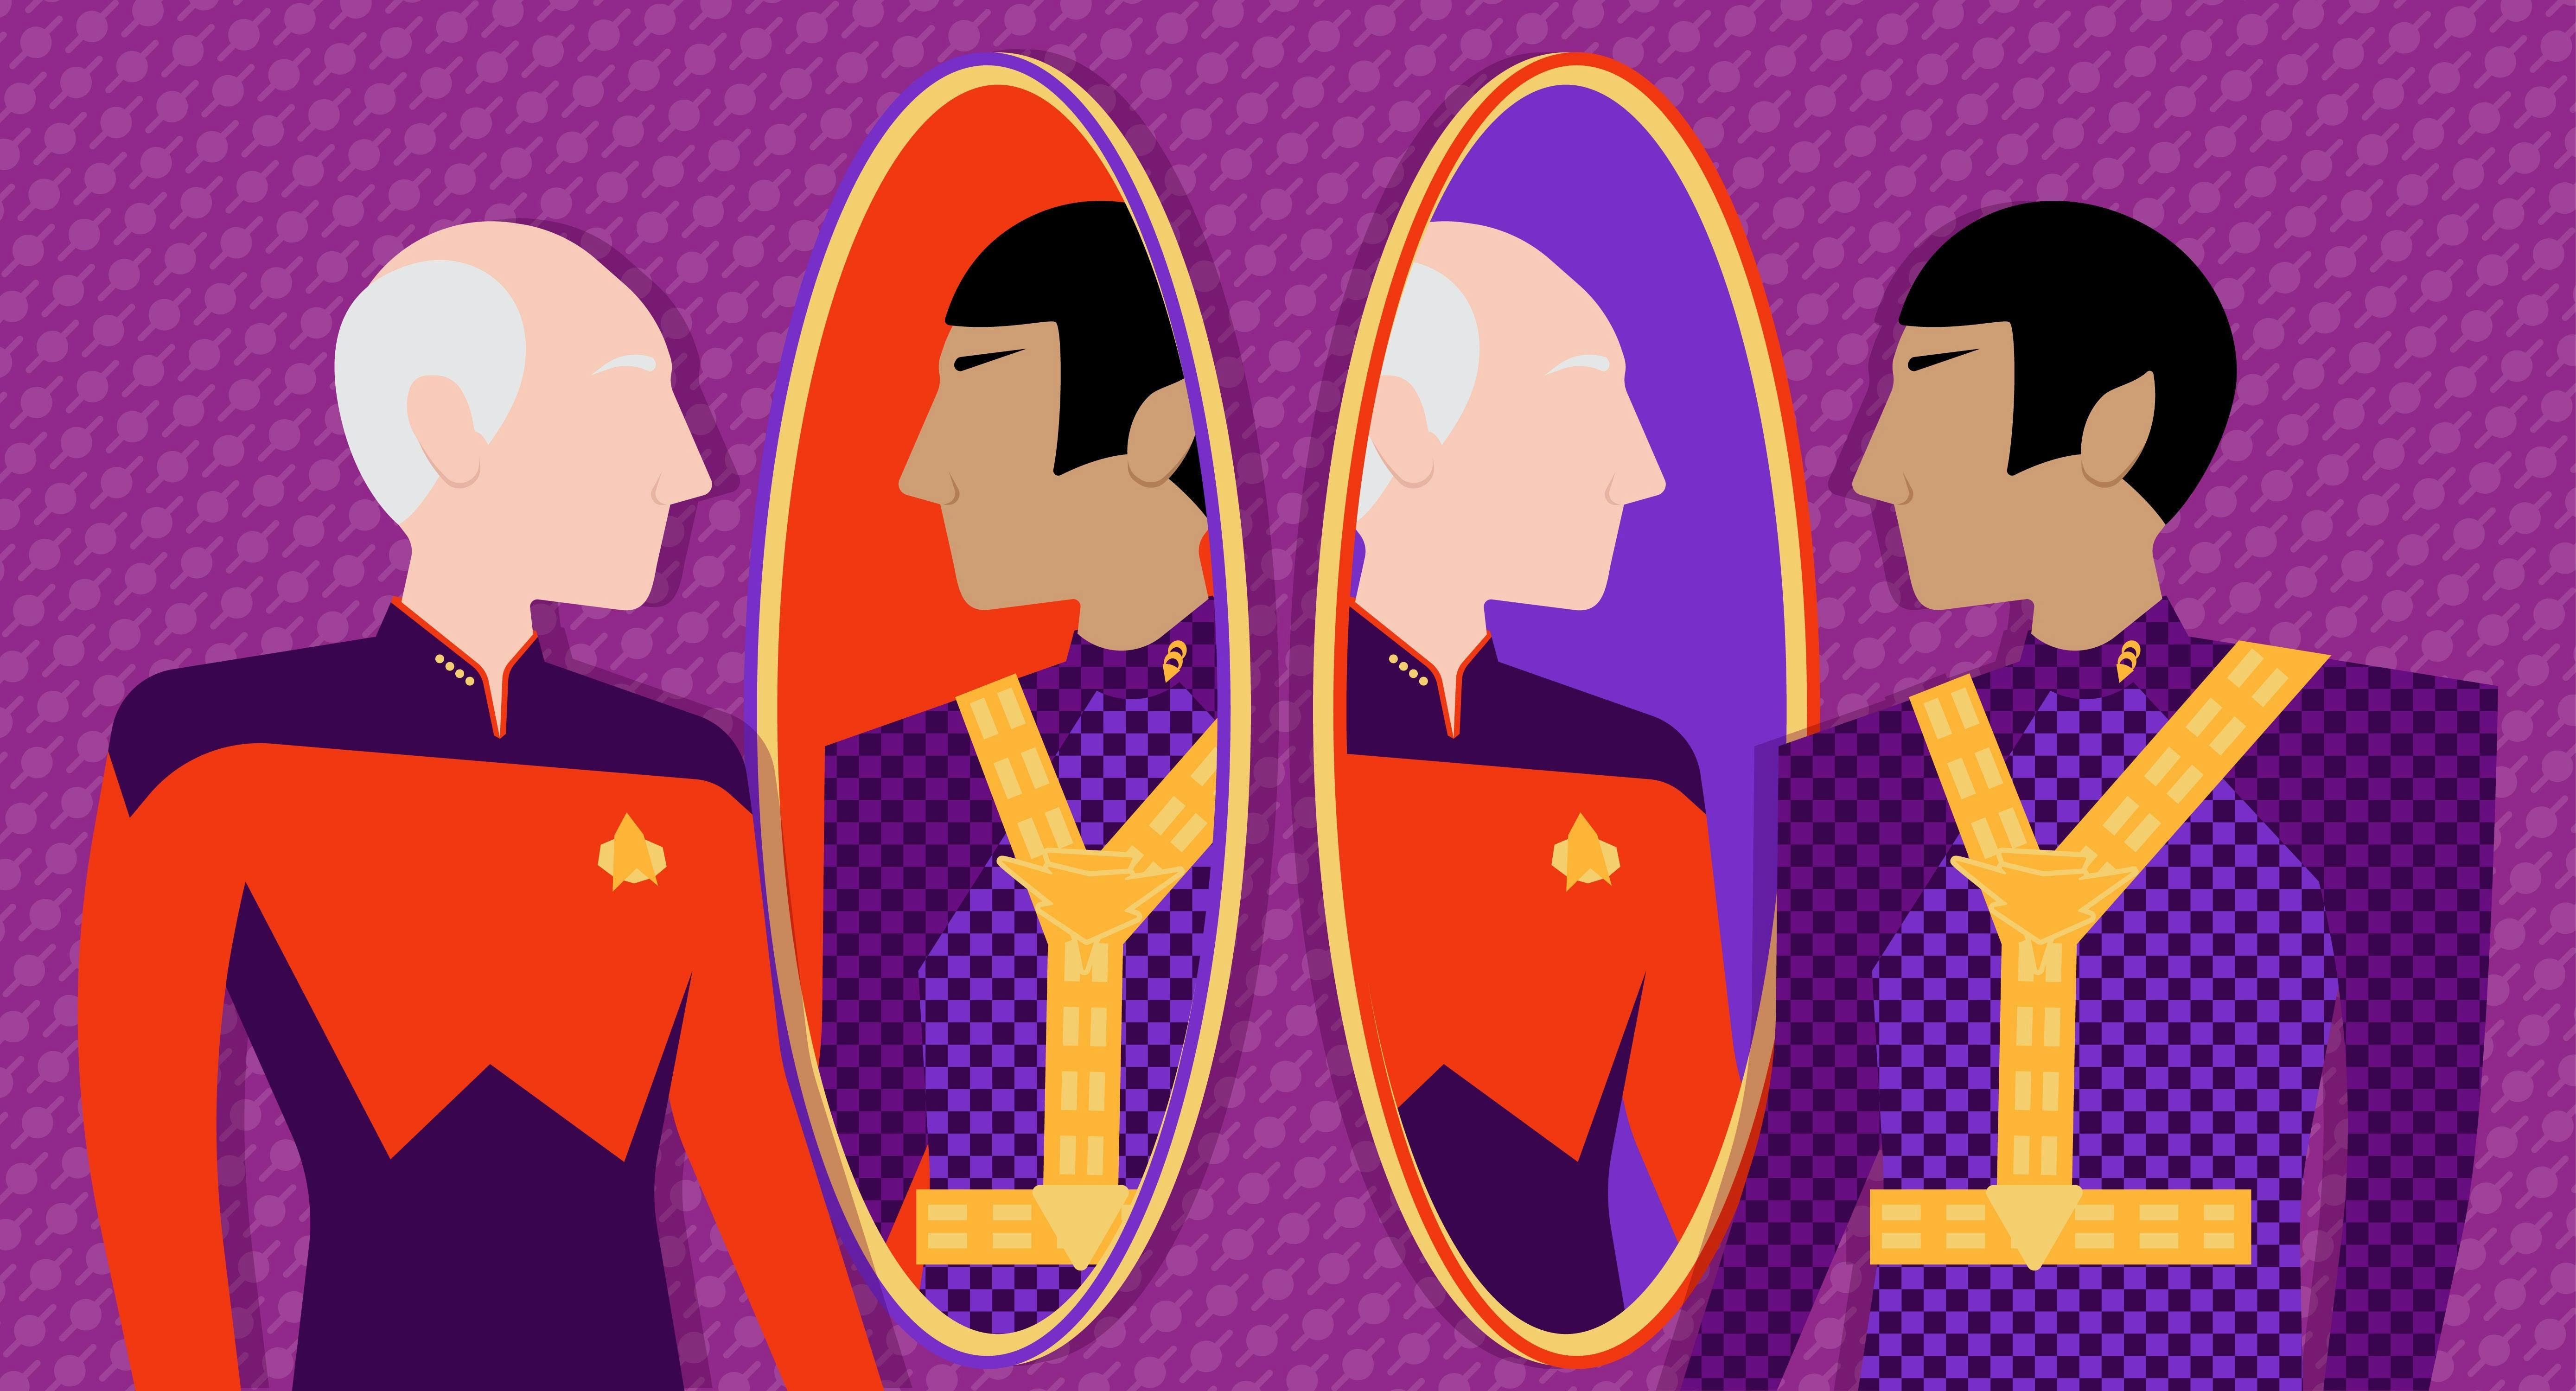 Illustrated image of Picard and a Romulan looking in a mirror and vice versa